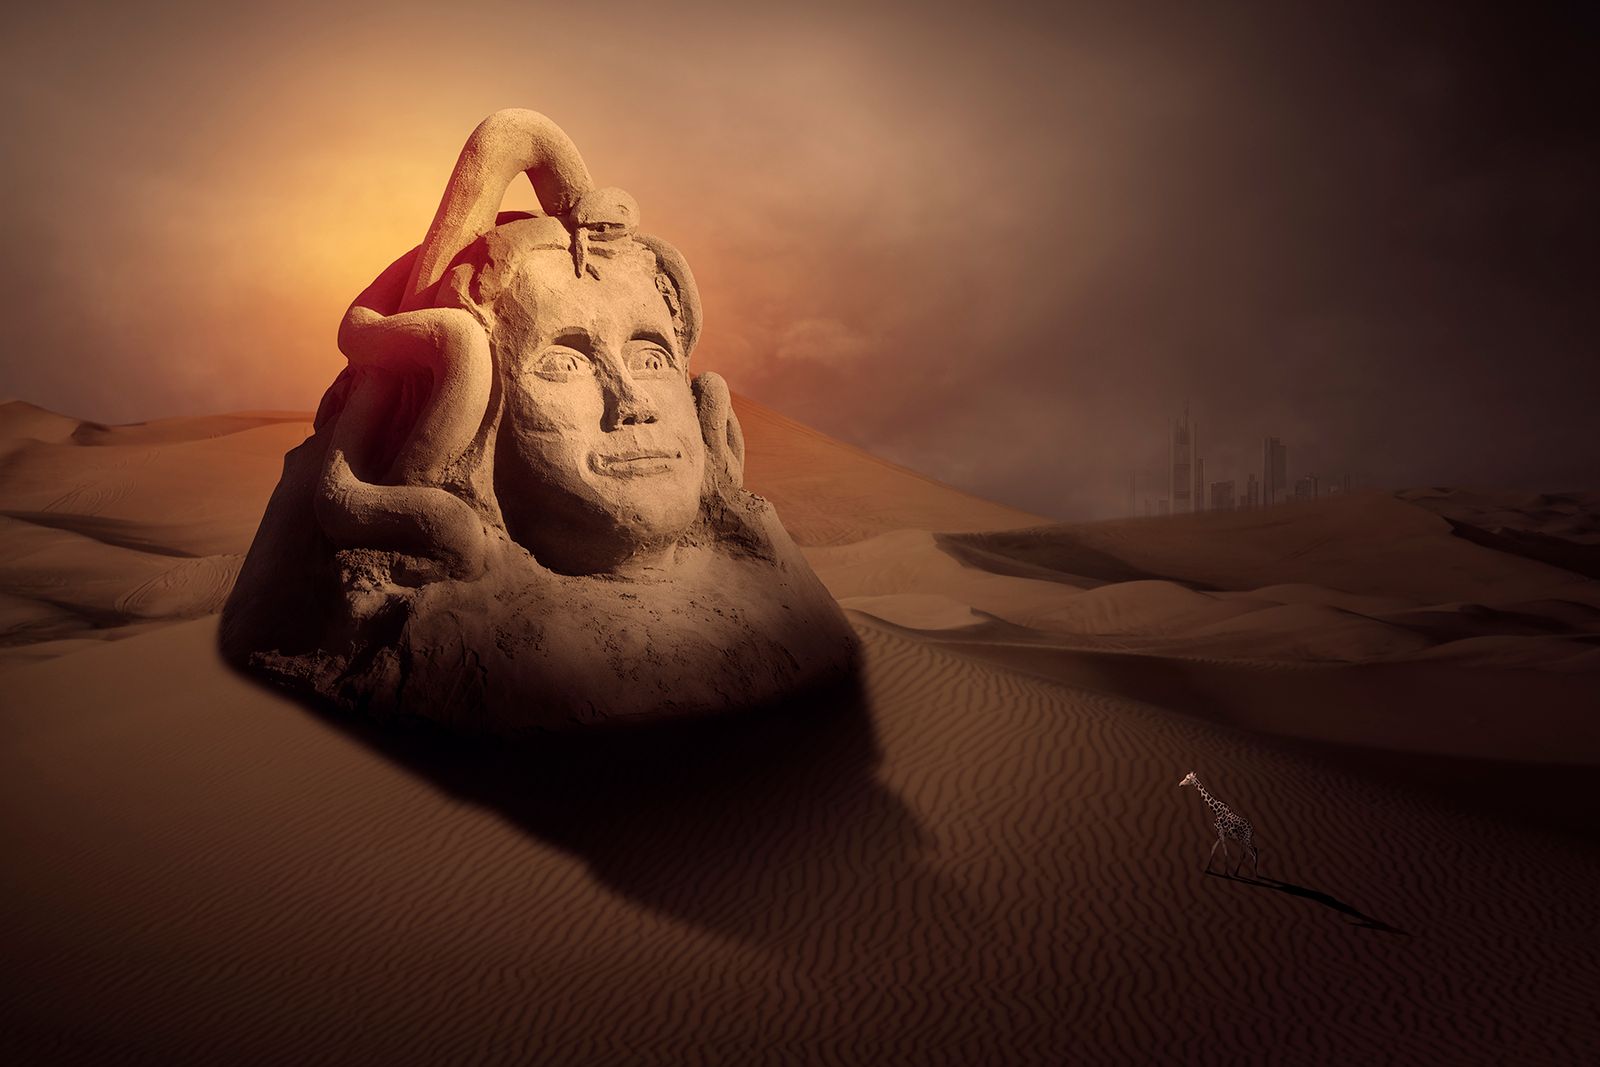 Monument of Sand